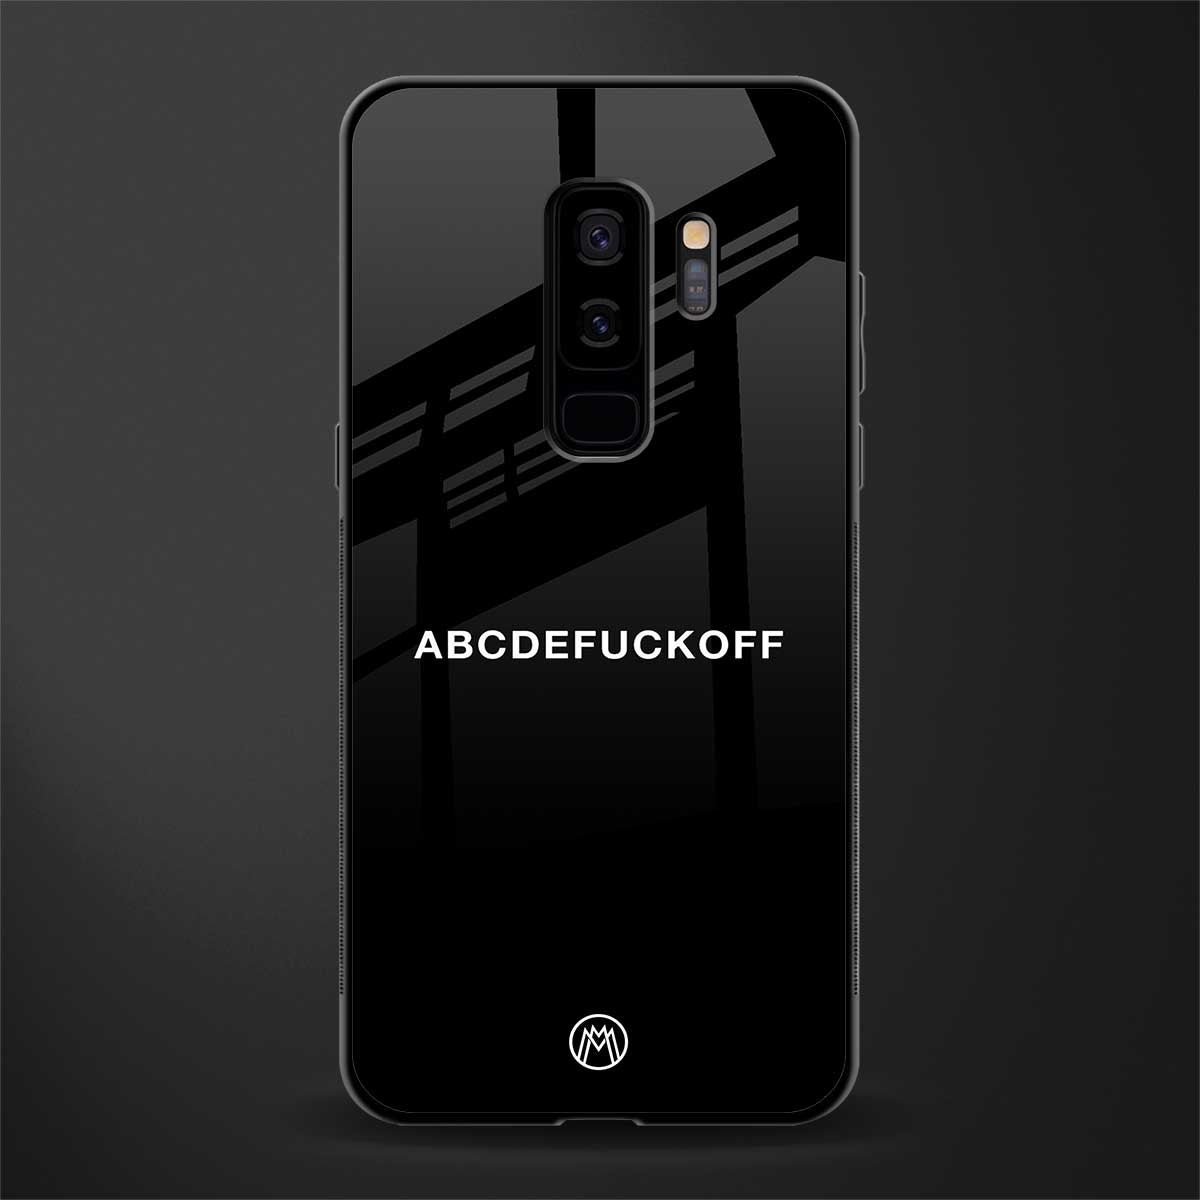 abcdefuckoff glass case for samsung galaxy s9 plus image